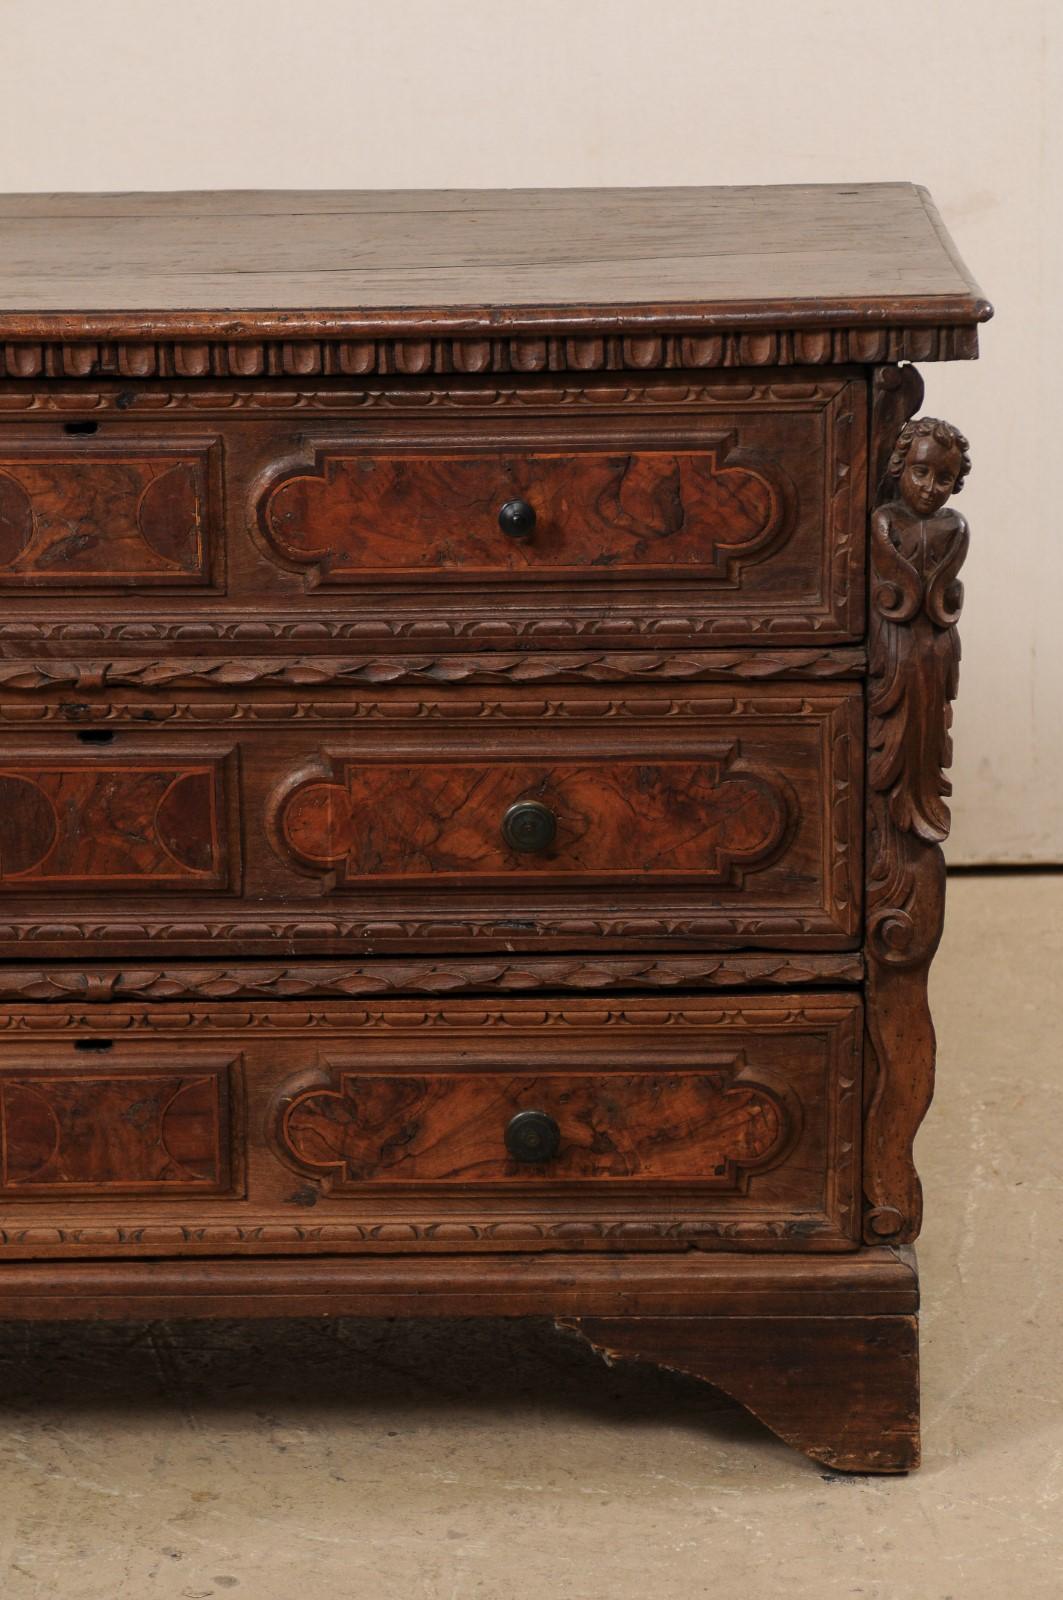 18th Century 18th C Italian Chest Adorn with Putti, Egg-n-Dart, and Acanthus Carvings For Sale